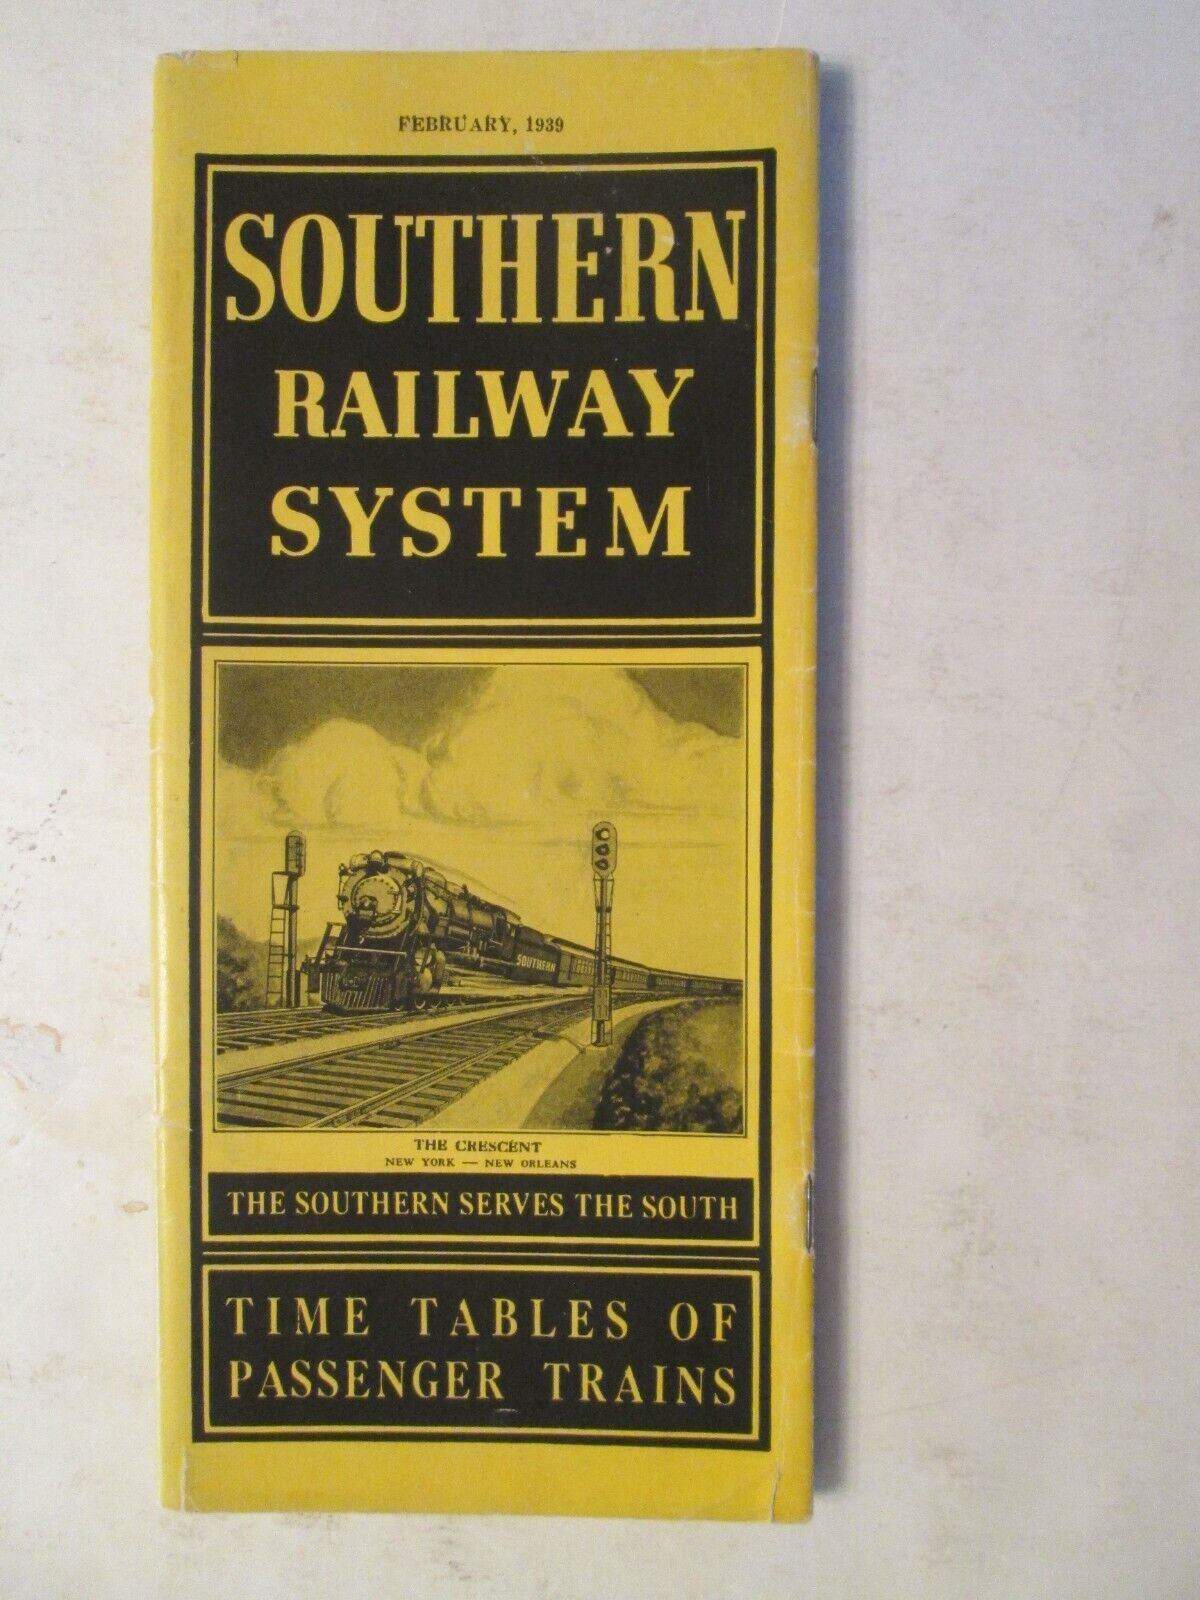 Southern Railway System Public Timetable February 1939